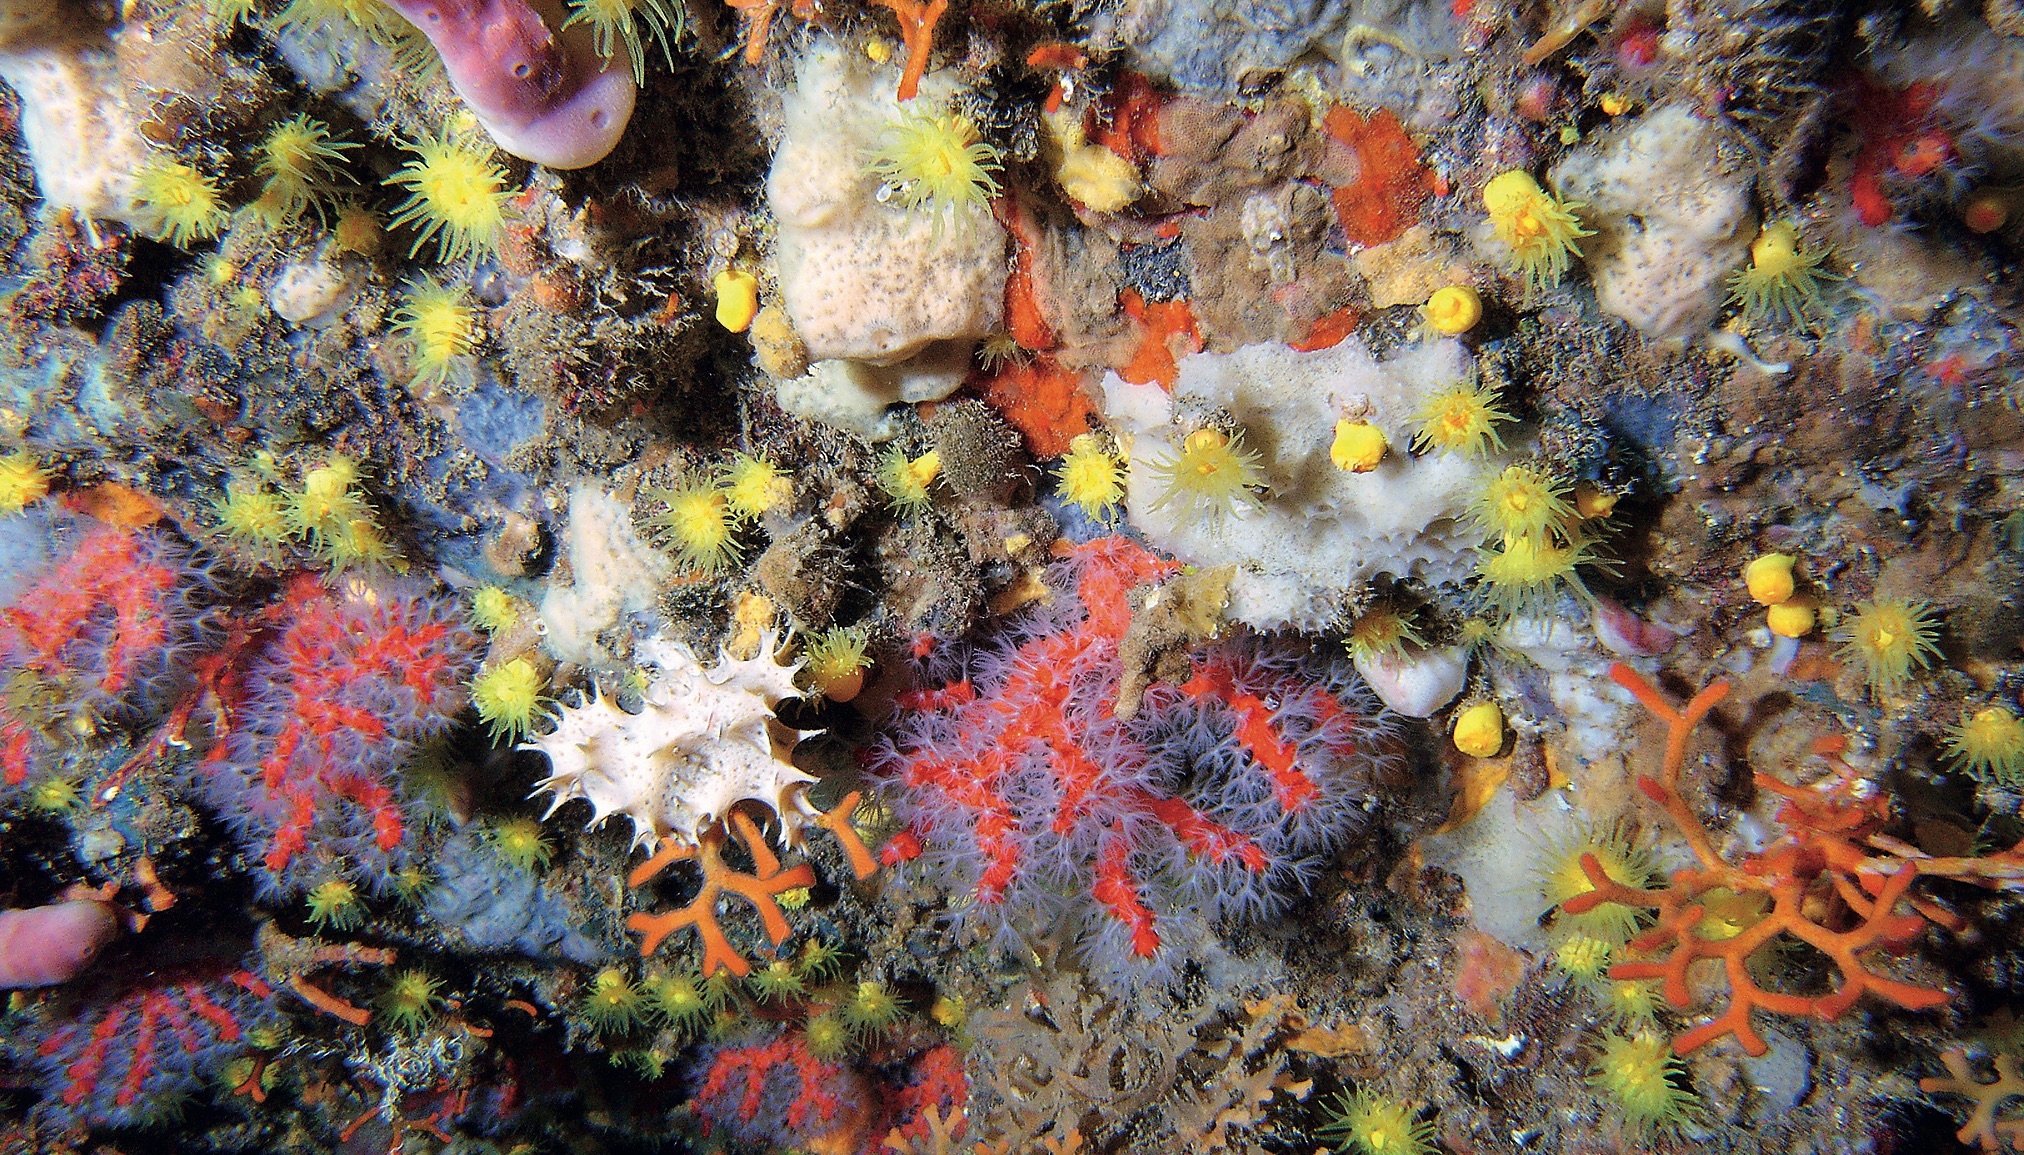 image of coral assemblage